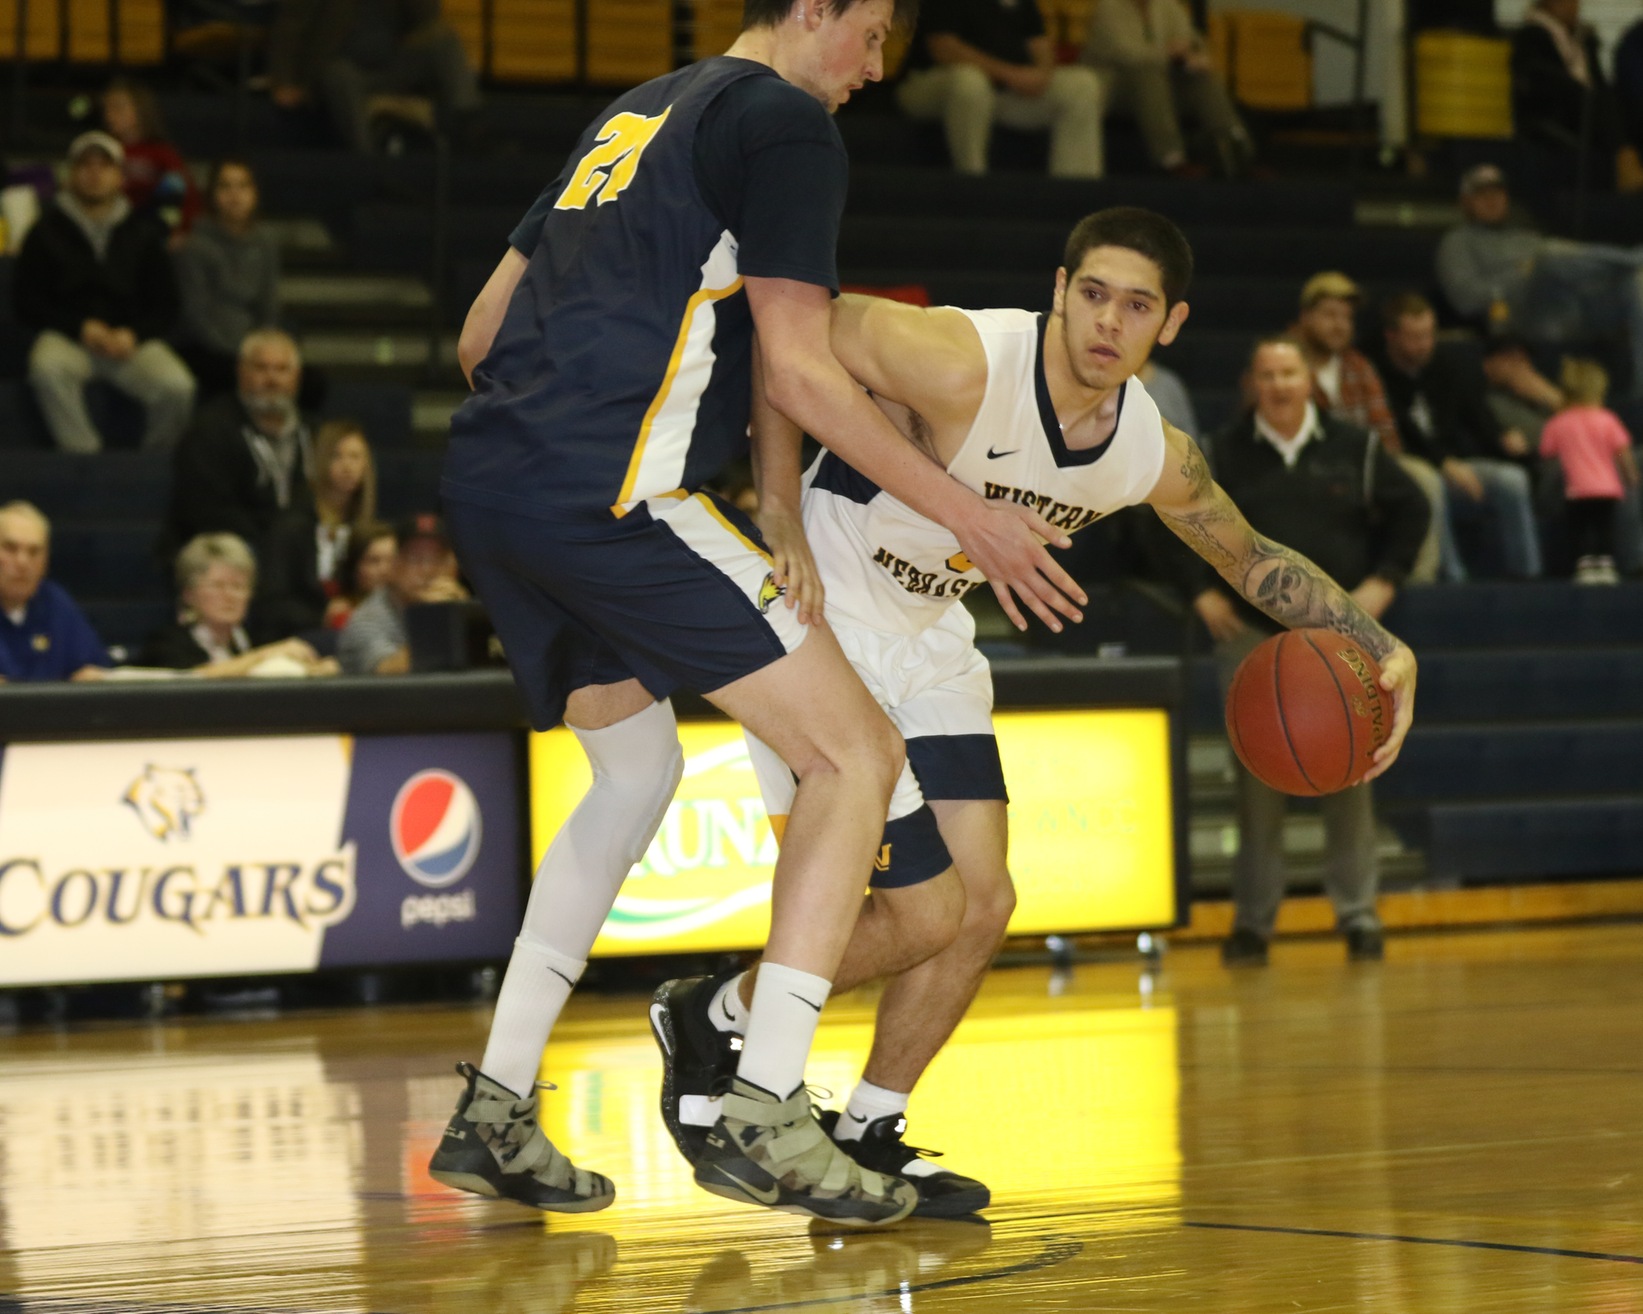 WNCC rolls past LCCC for 9th straight win